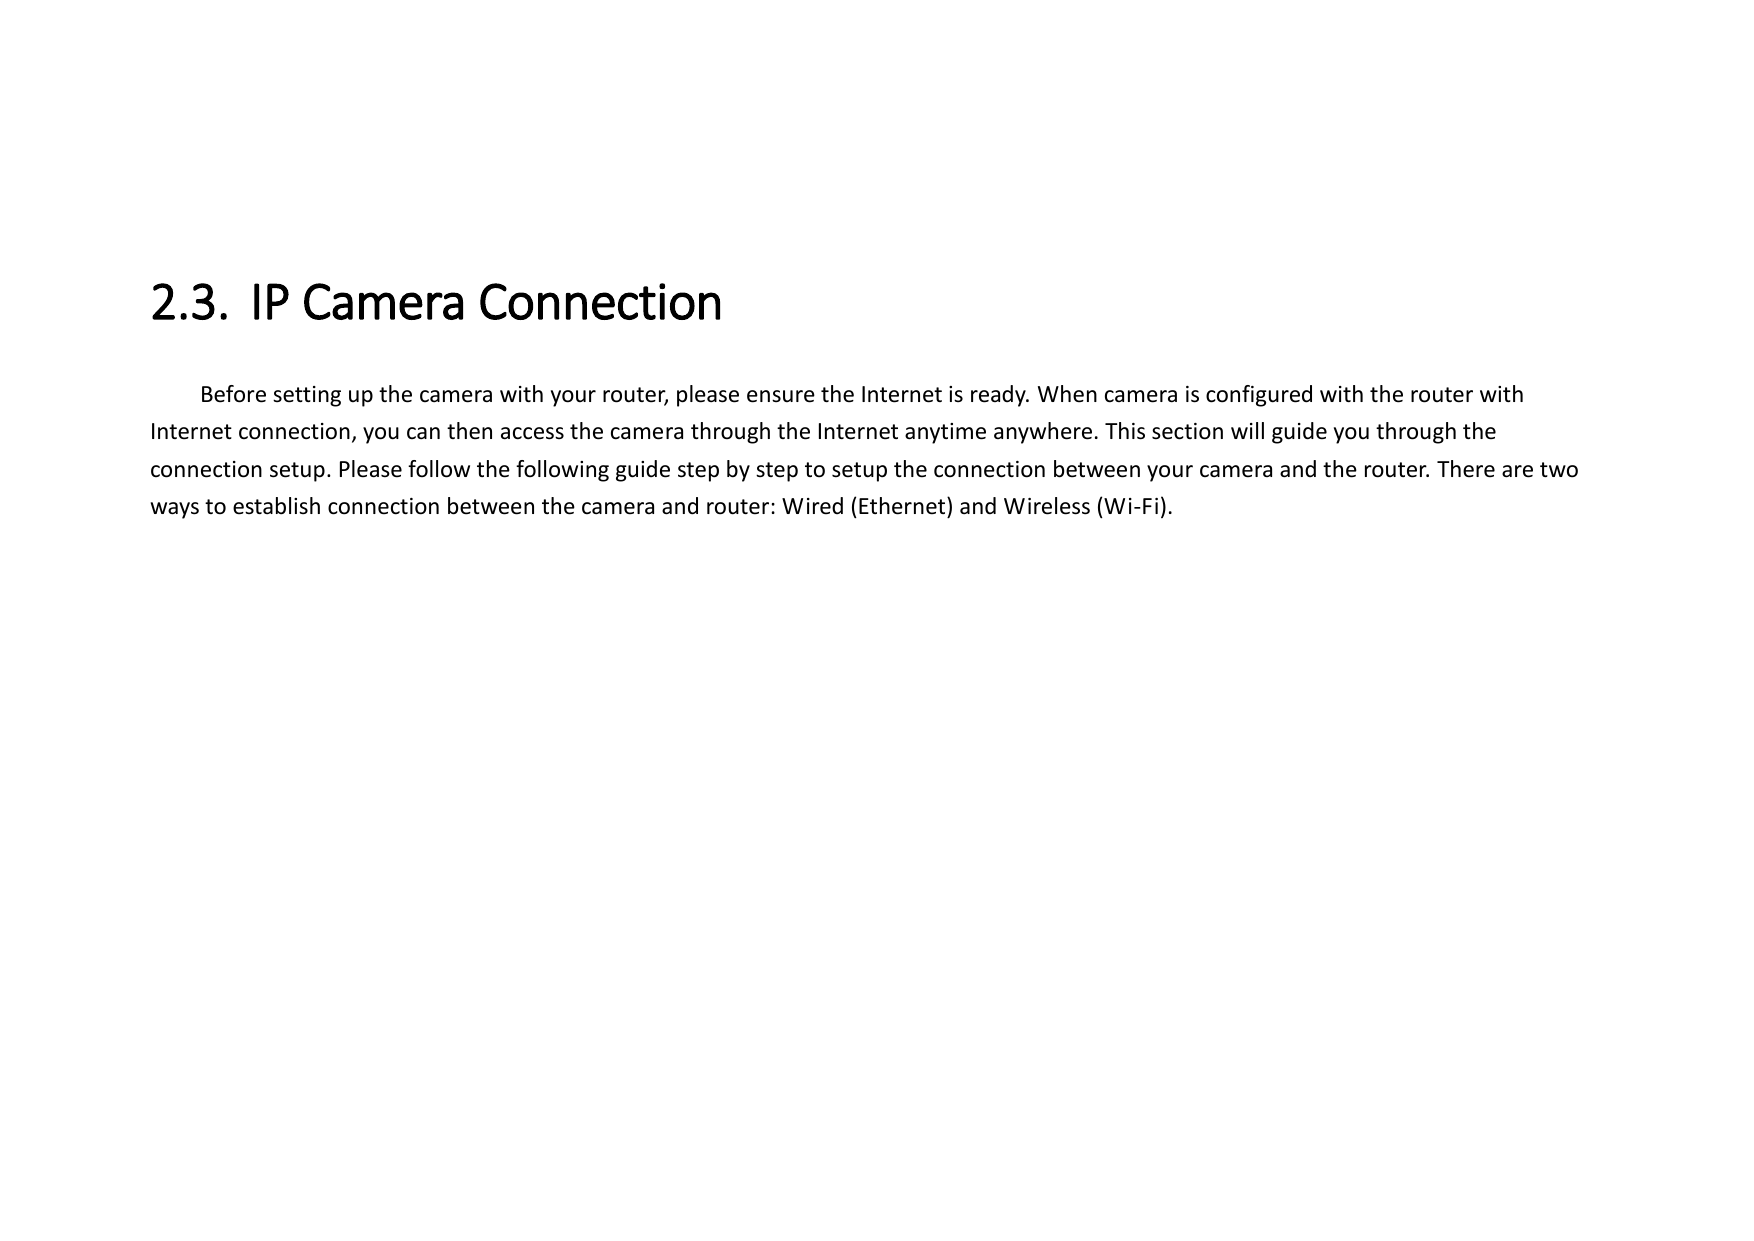  2.3. IP Camera Connection   Before setting up the camera with your router, please ensure the Internet is ready. When camera is configured with the router with Internet connection, you can then access the camera through the Internet anytime anywhere. This section will guide you through the connection setup. Please follow the following guide step by step to setup the connection between your camera and the router. There are two ways to establish connection between the camera and router: Wired (Ethernet) and Wireless (Wi-Fi).    